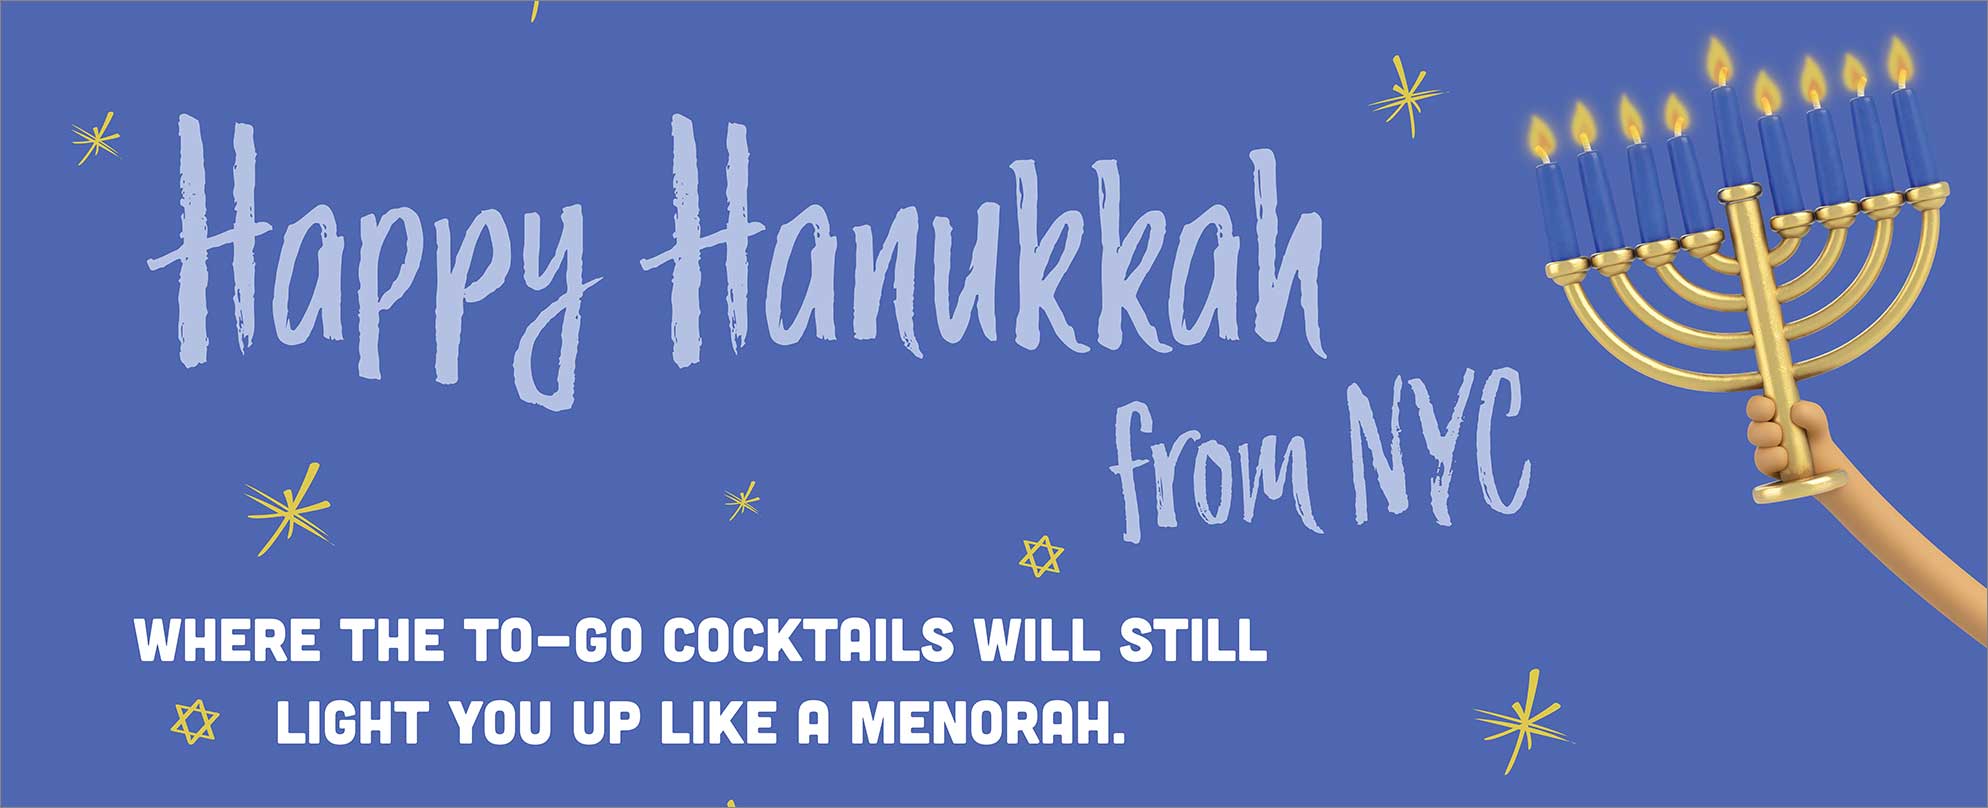 HAPPY HANUKKAH FROM NYC - Where the to-go cocktails will still light you up like a menorah